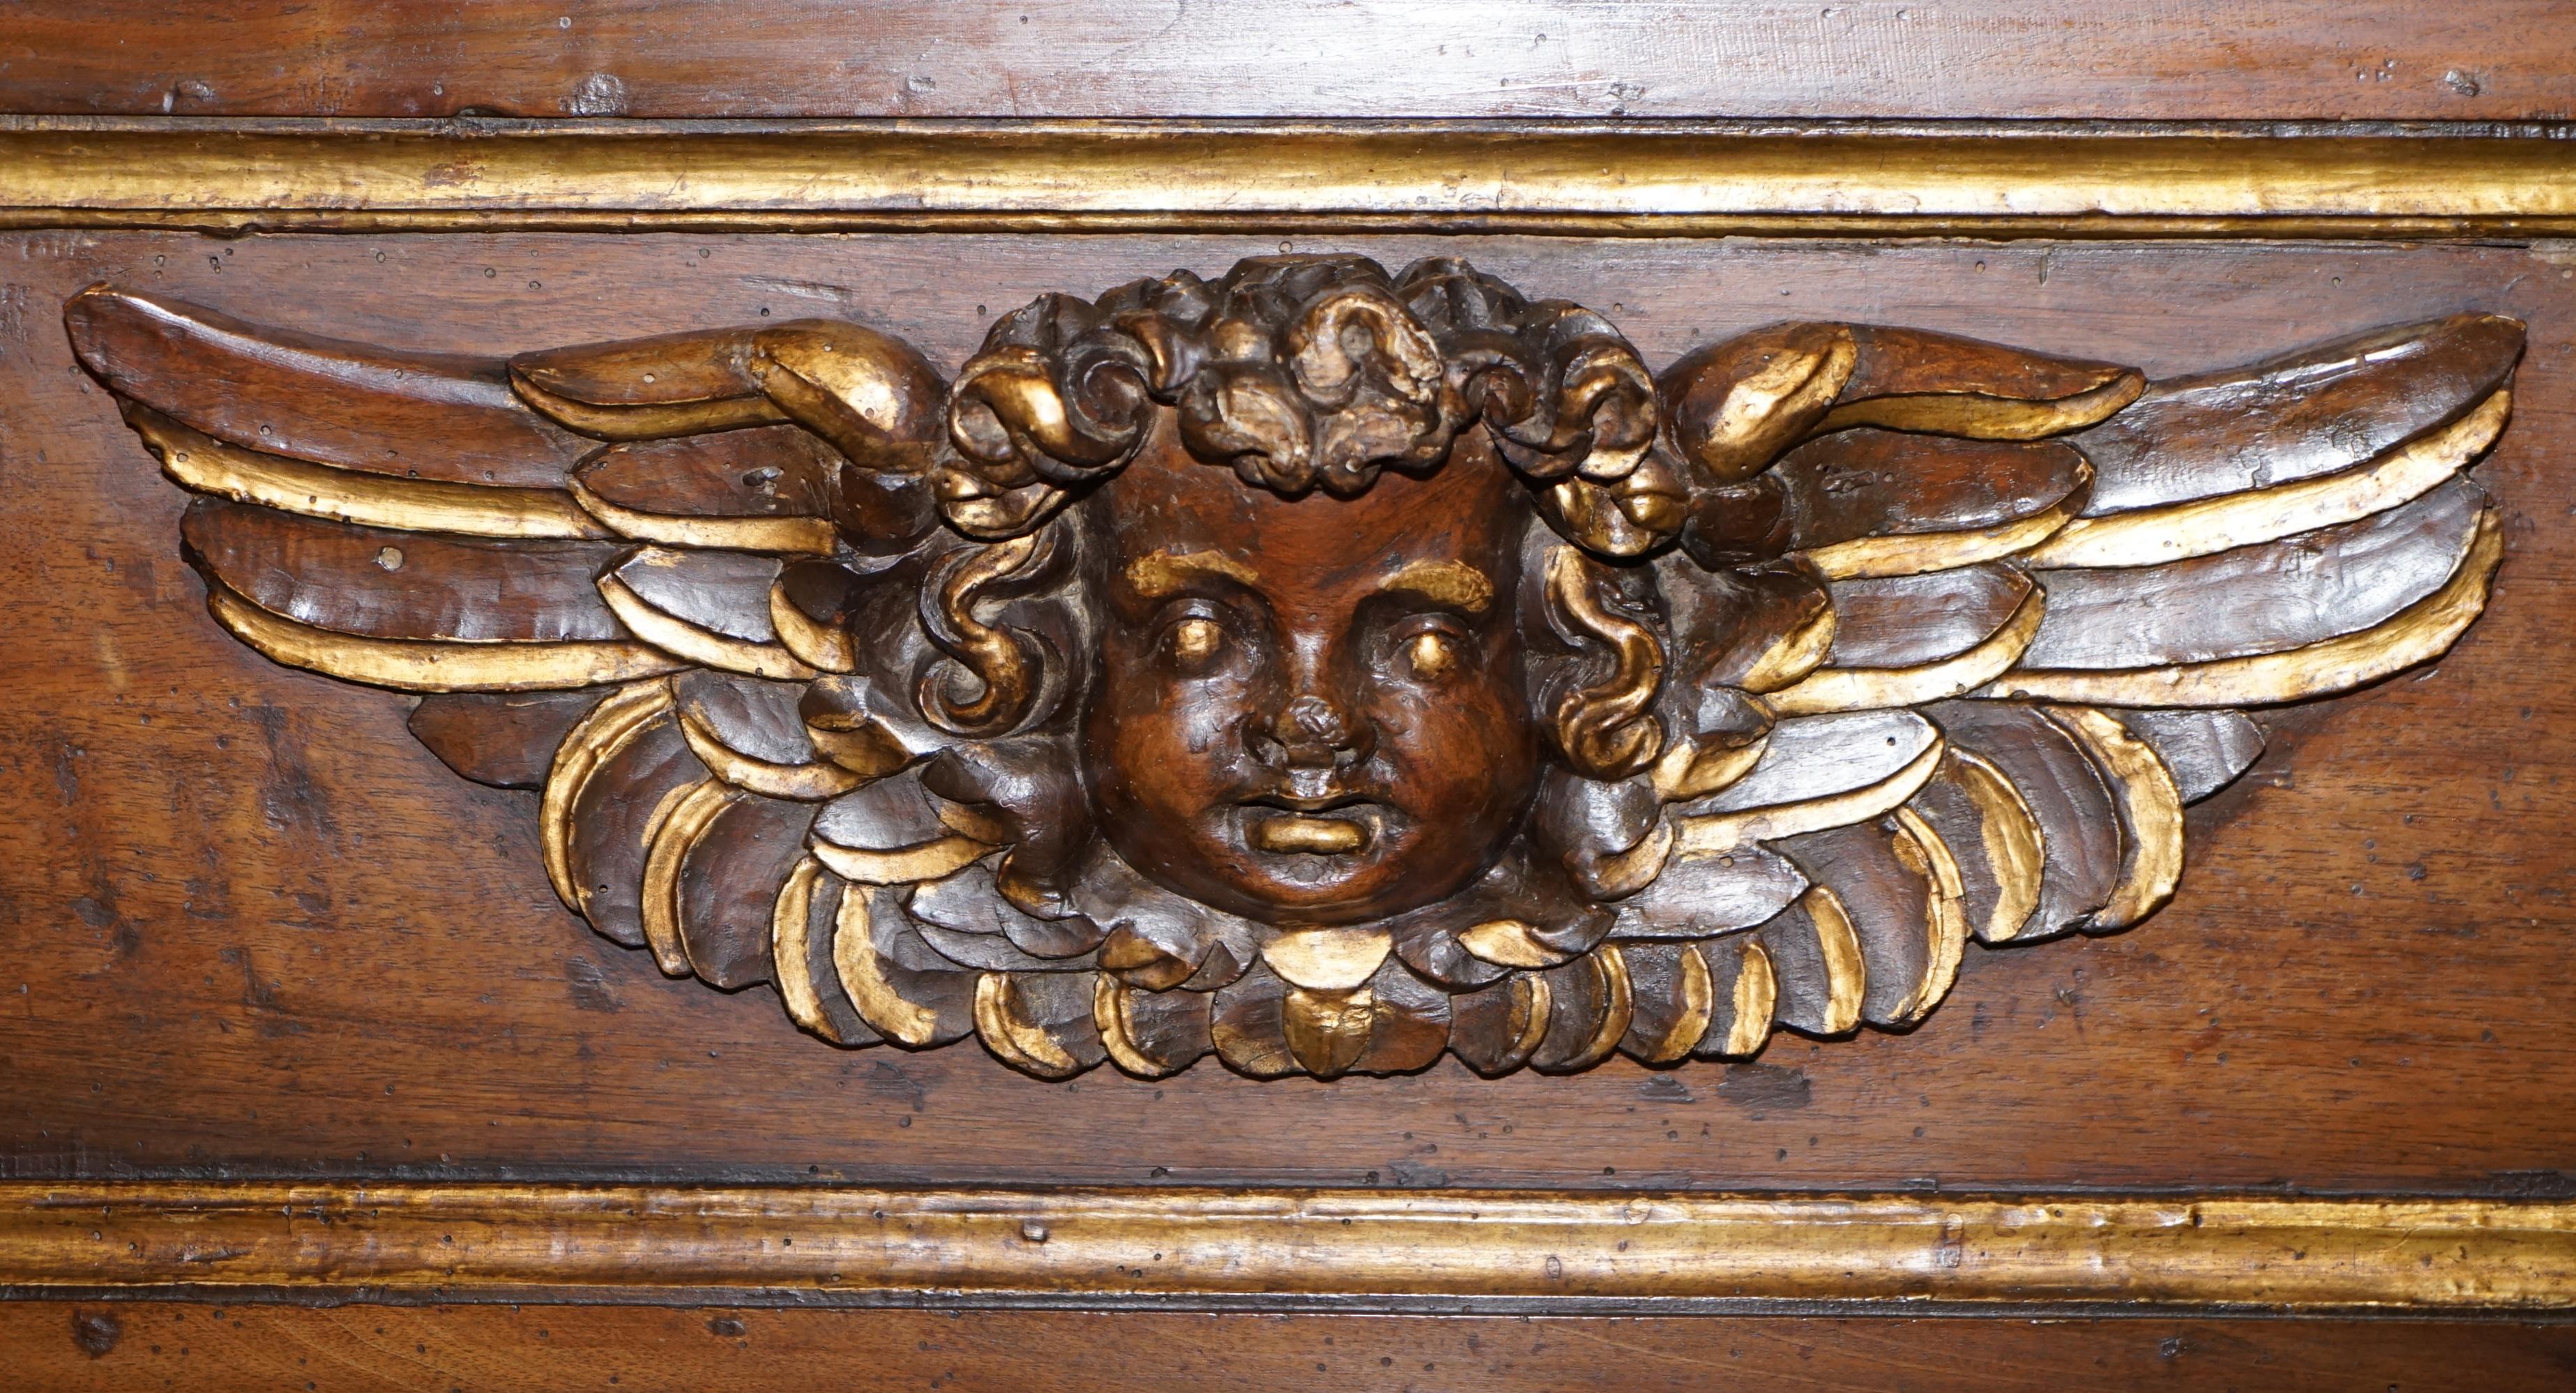 Early 18th Century Pair of circa 1700 Baroque Walnut & Parcel Gilt Library Bookcases Cherub Angels